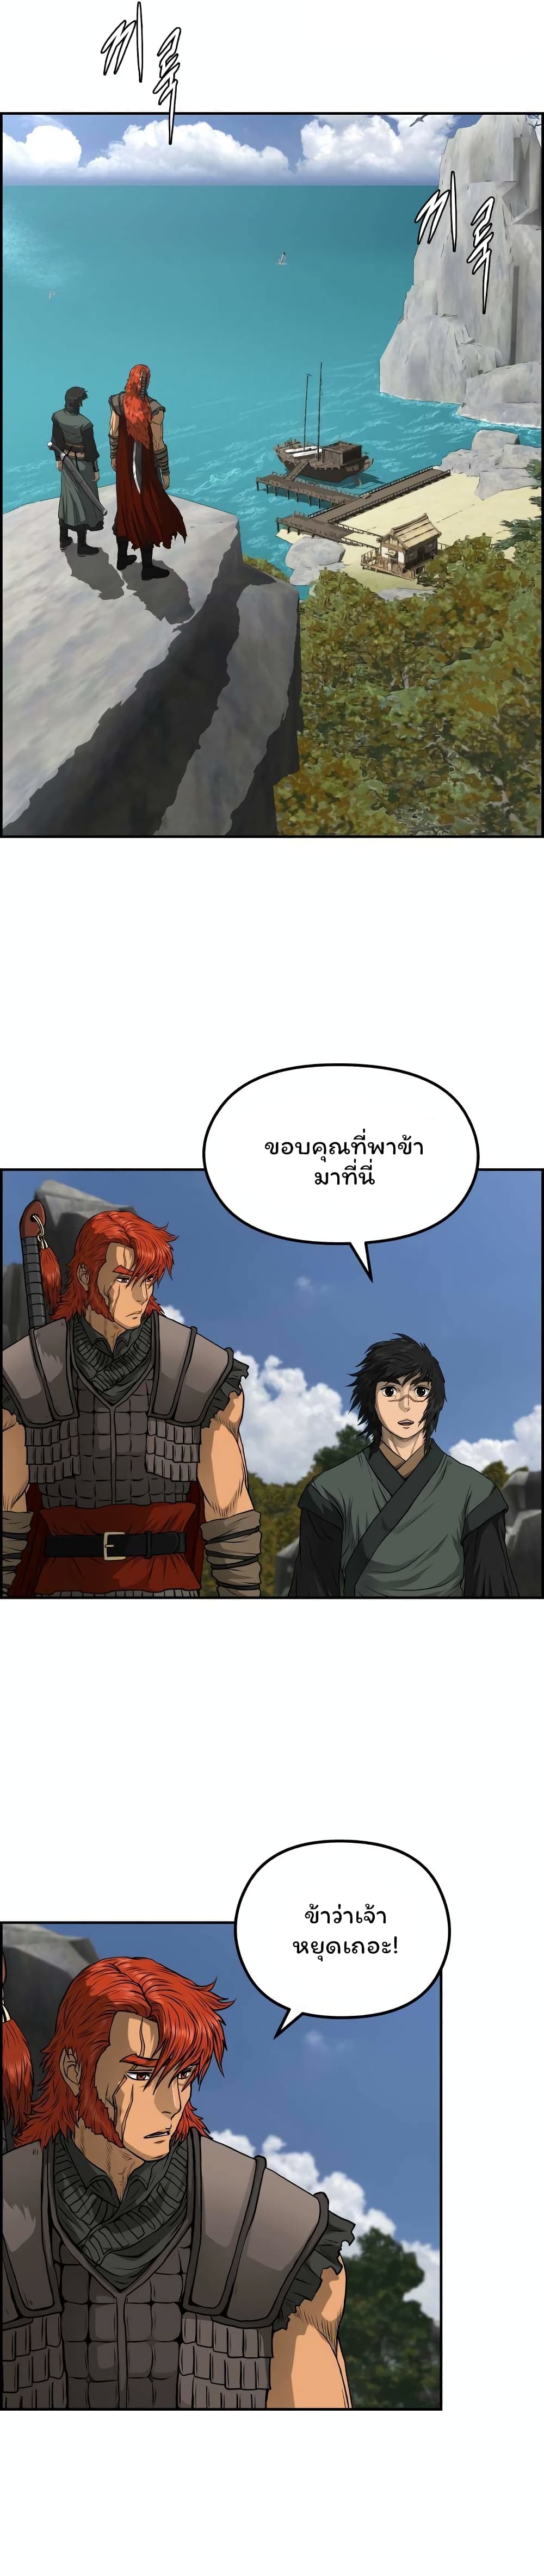 Blade of Winds and Thunders ตอนที่ 72 (22)